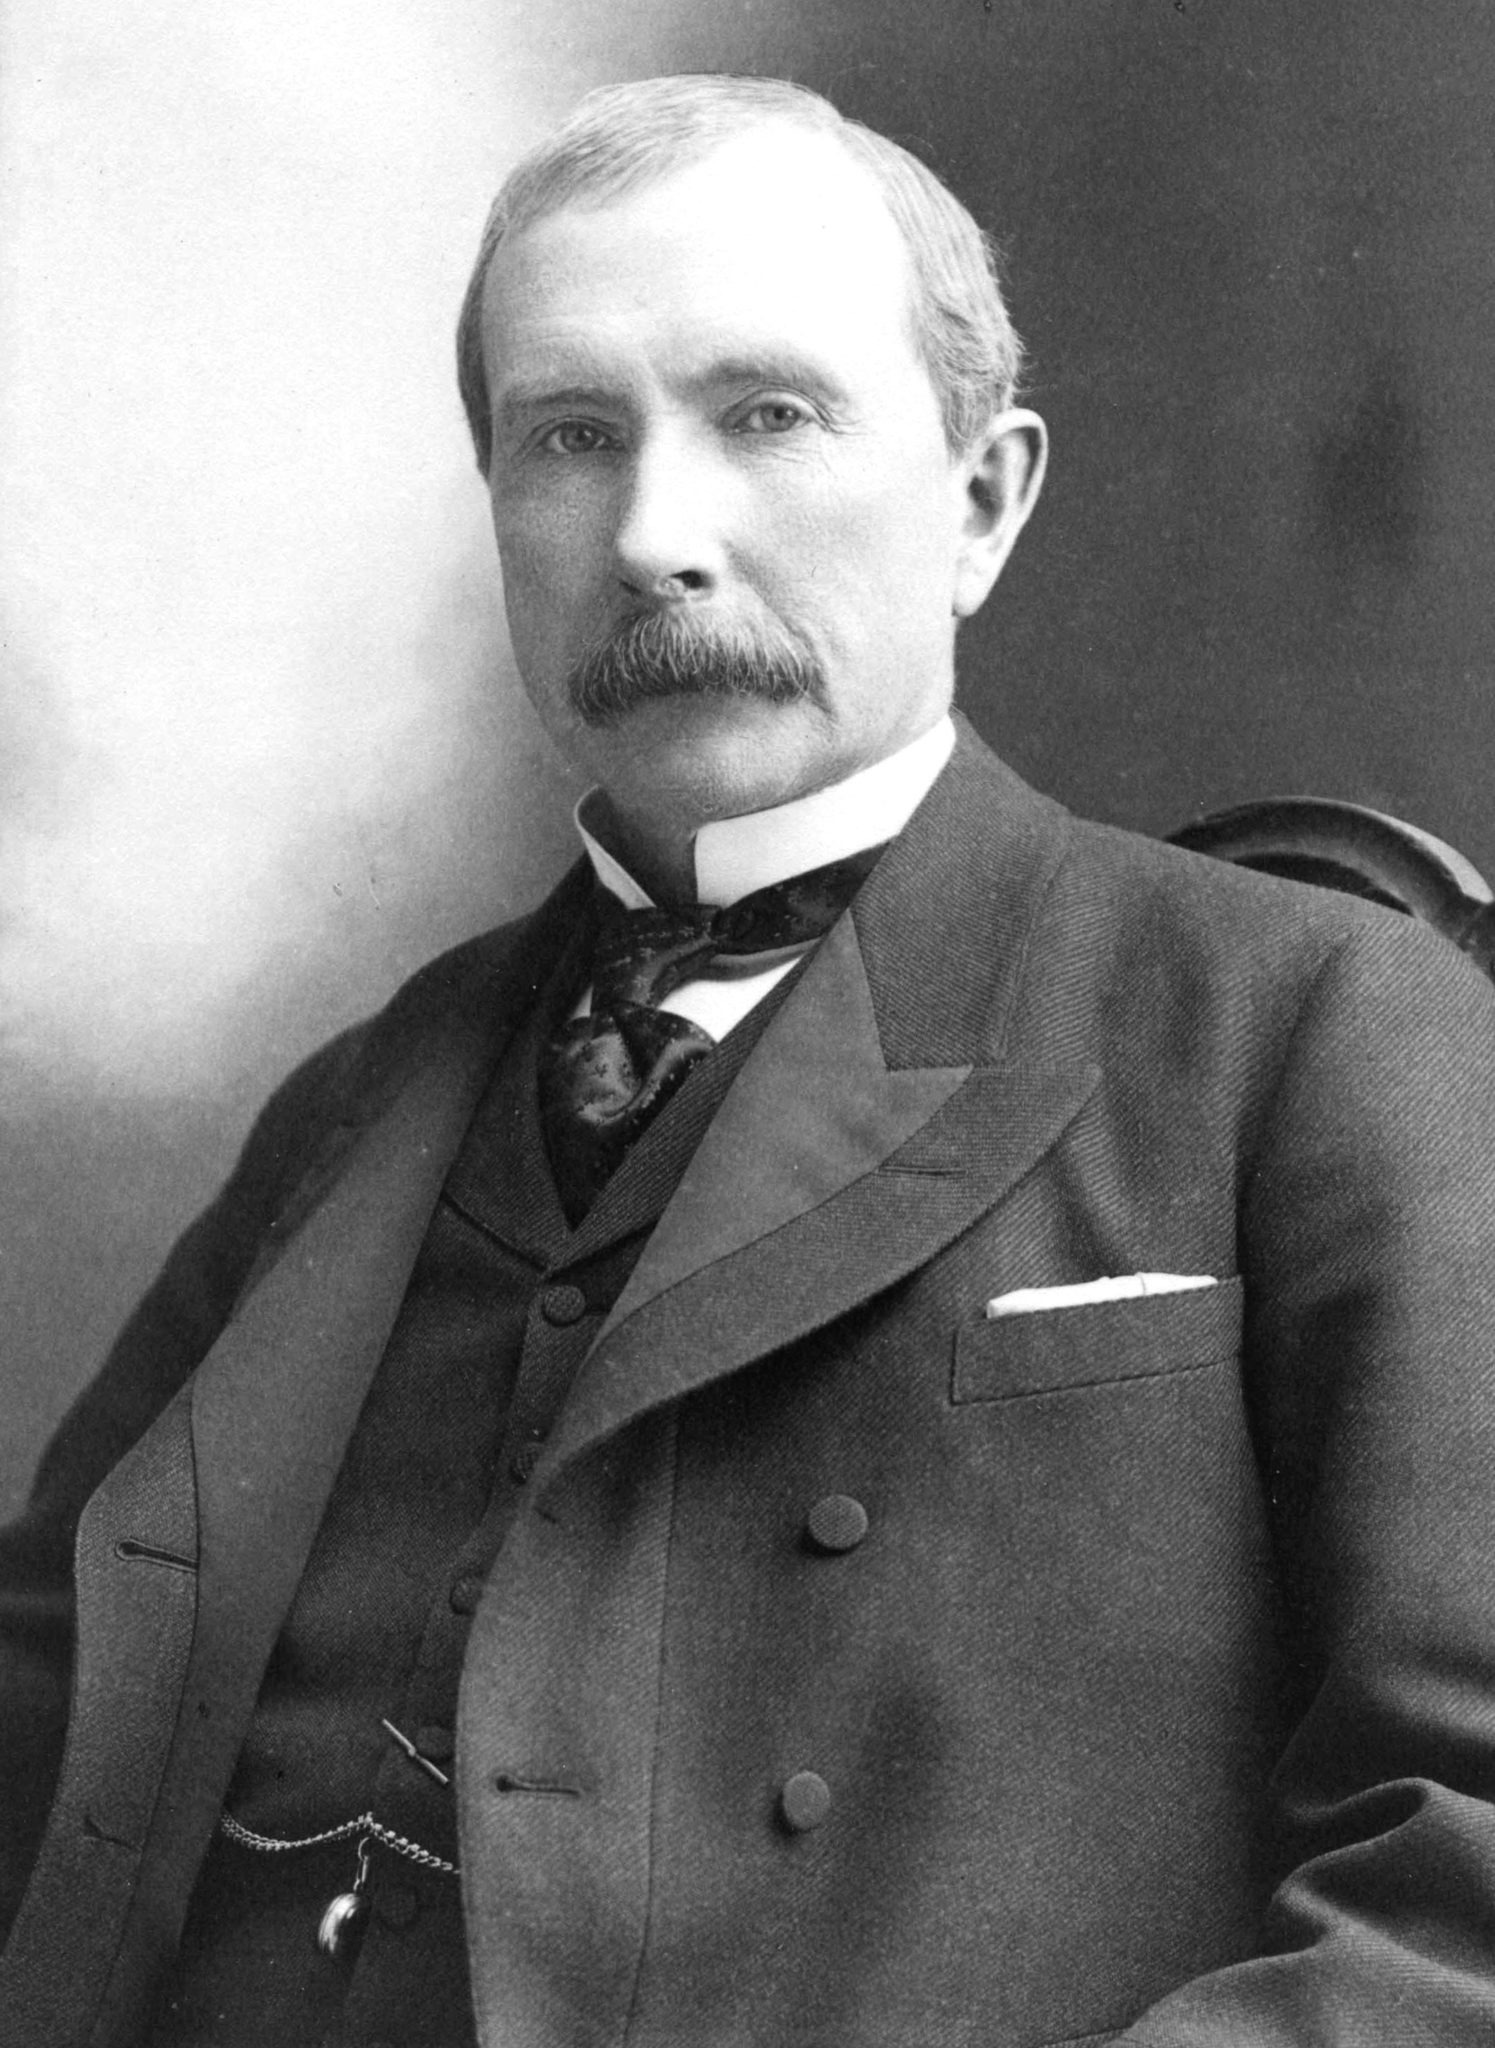 that in full retirement at age 63, Rockefeller earned over $58 million in investments in 1902.